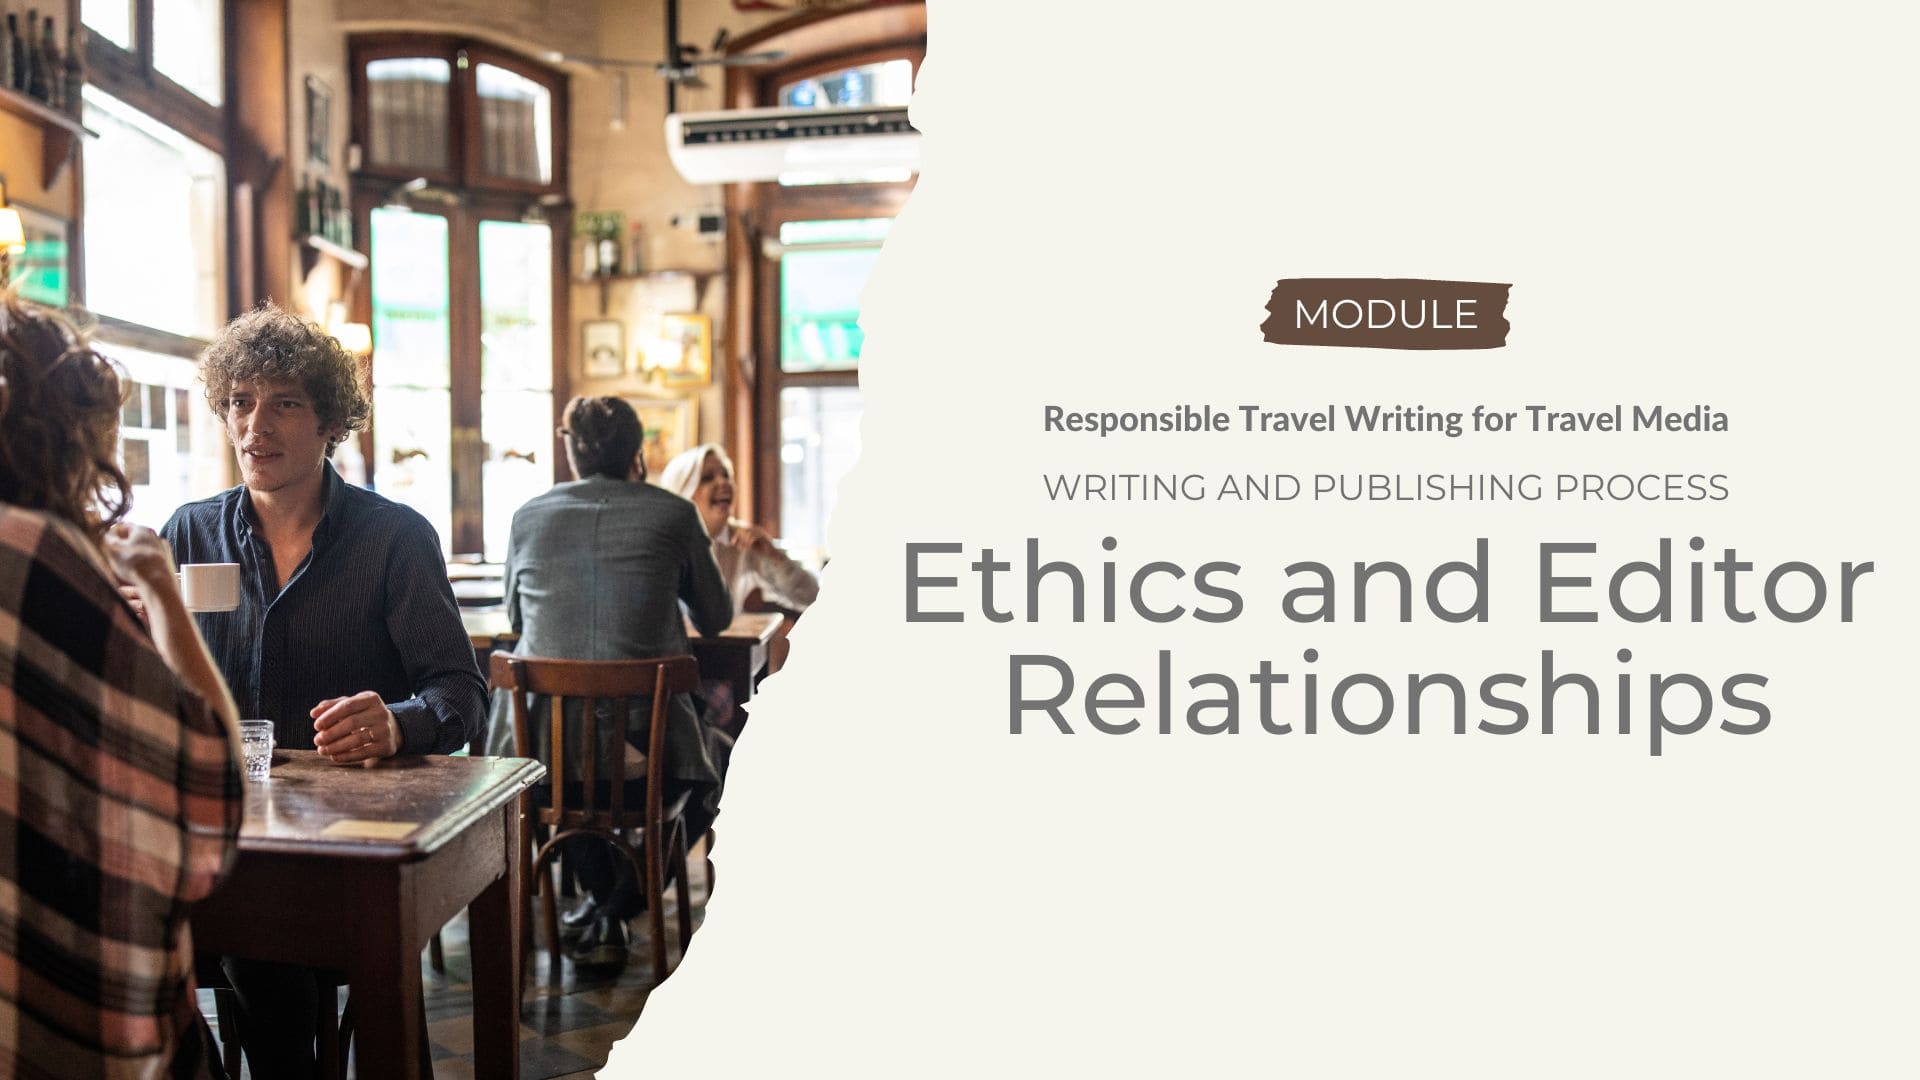 Writing and Publishing Process - Ethics and Editor Relationships